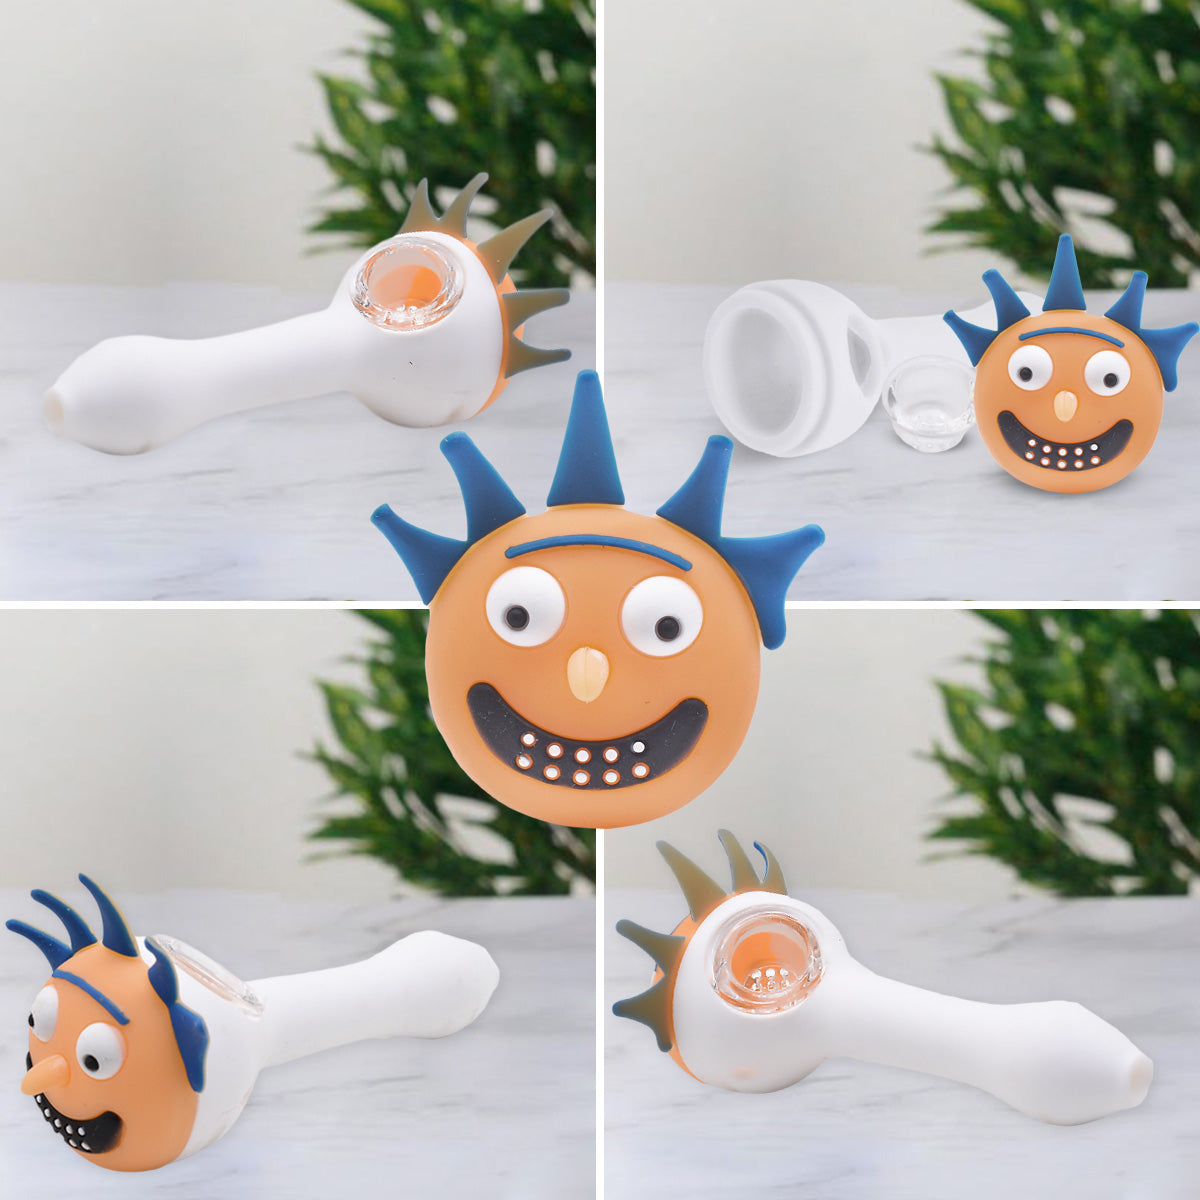 Silicone Smoking Pipe, Unbreakable with Glass Bowl, Rick Morty, White Orange